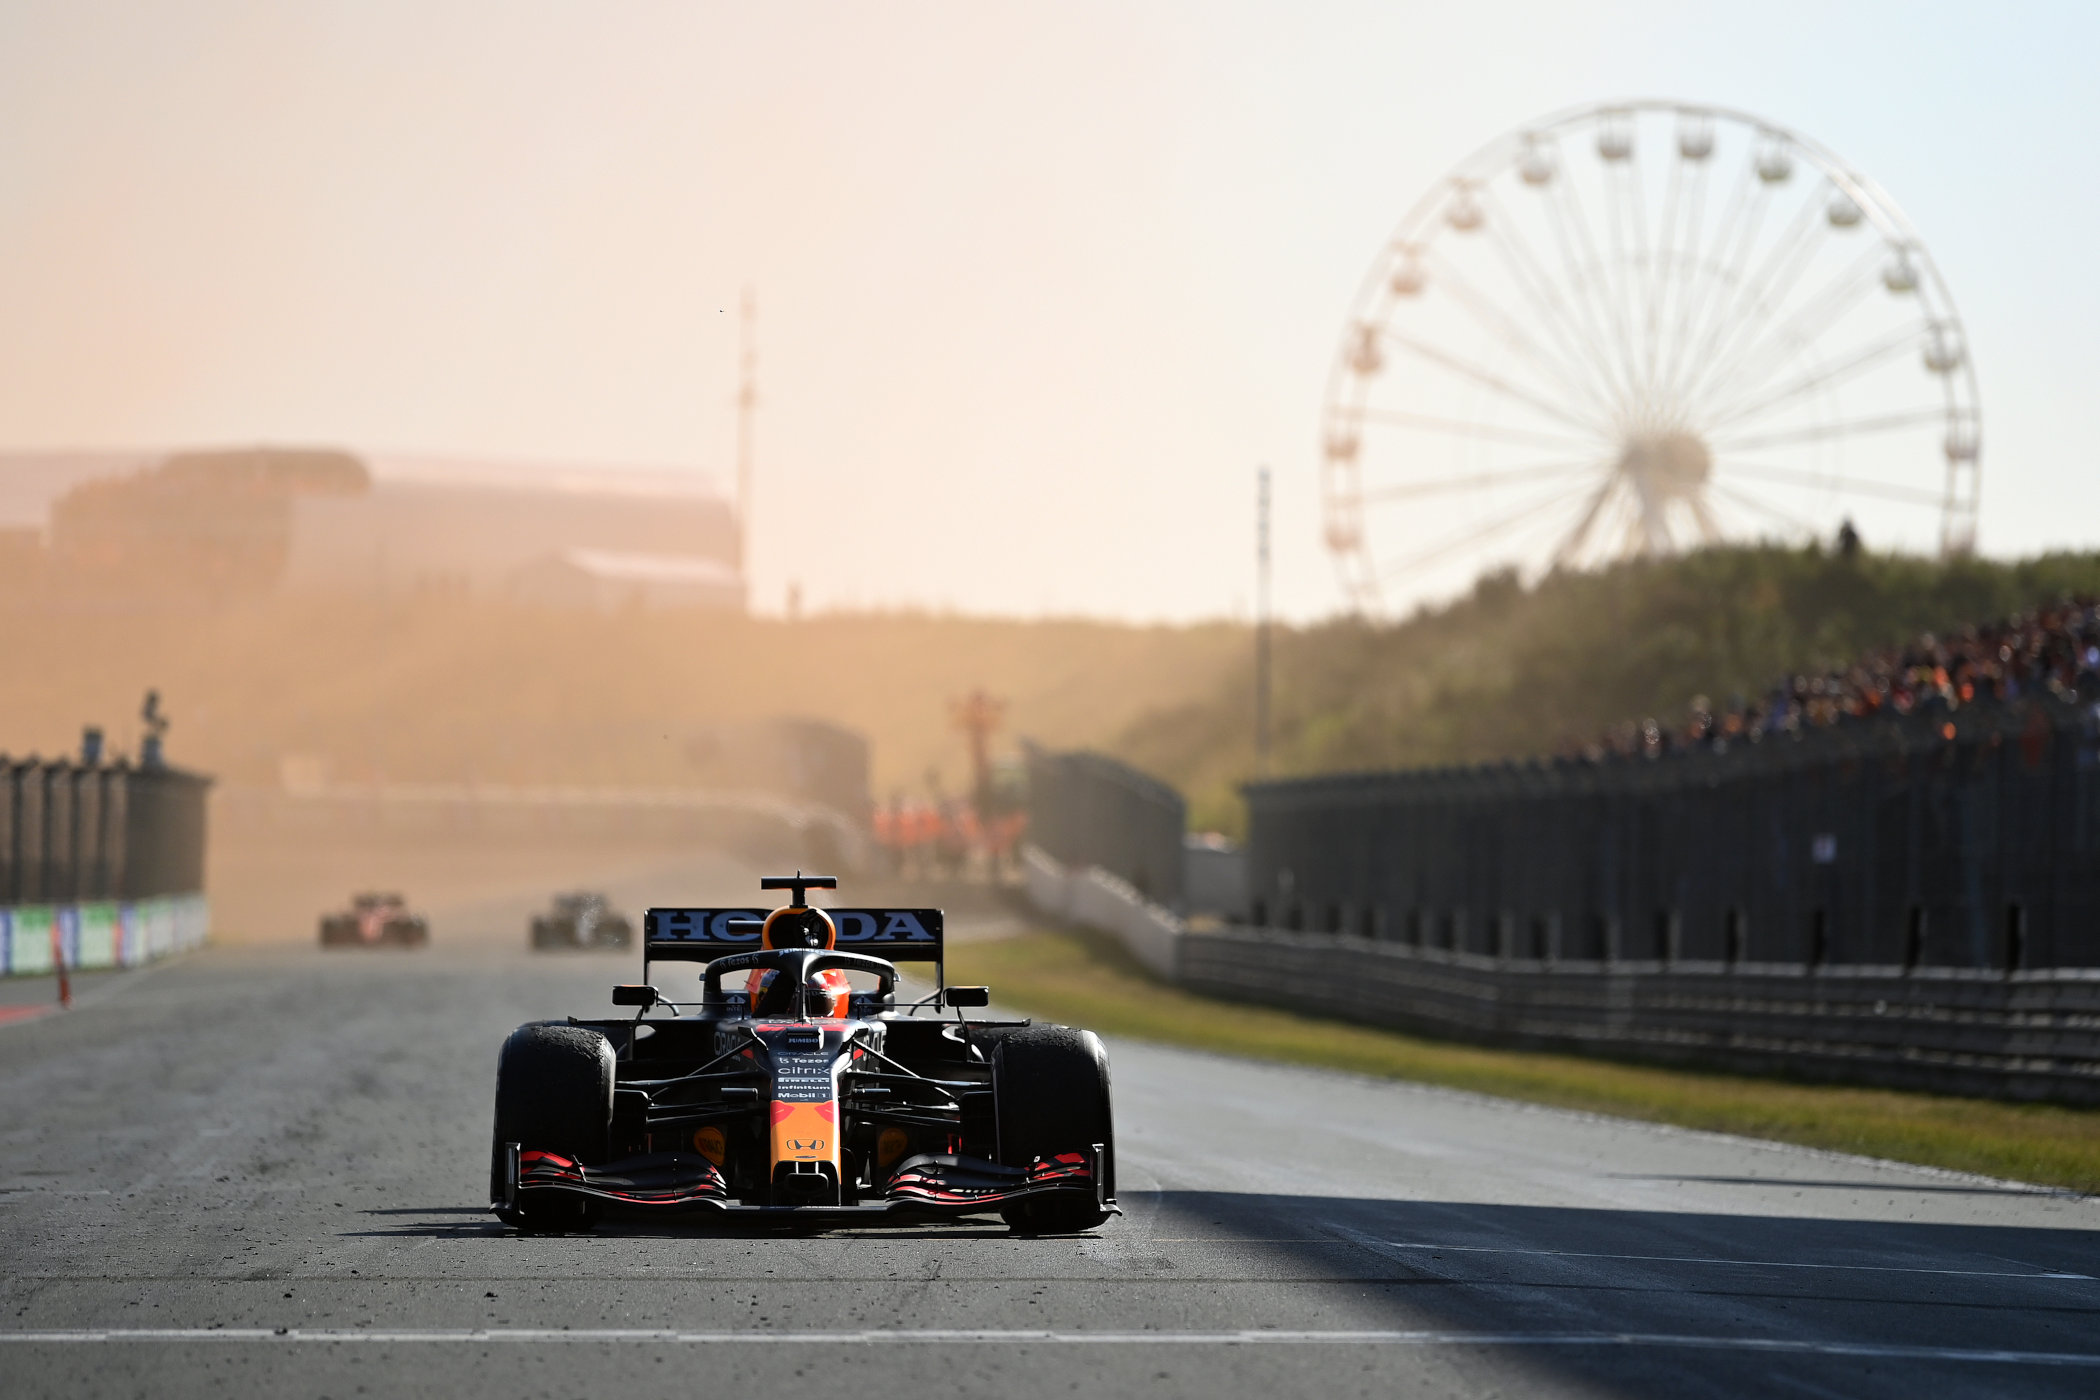 Max Verstappen winning in front of his home crowd during the 2021 Dutch Grand Prix at Zandvoort - F1-Fansite.com